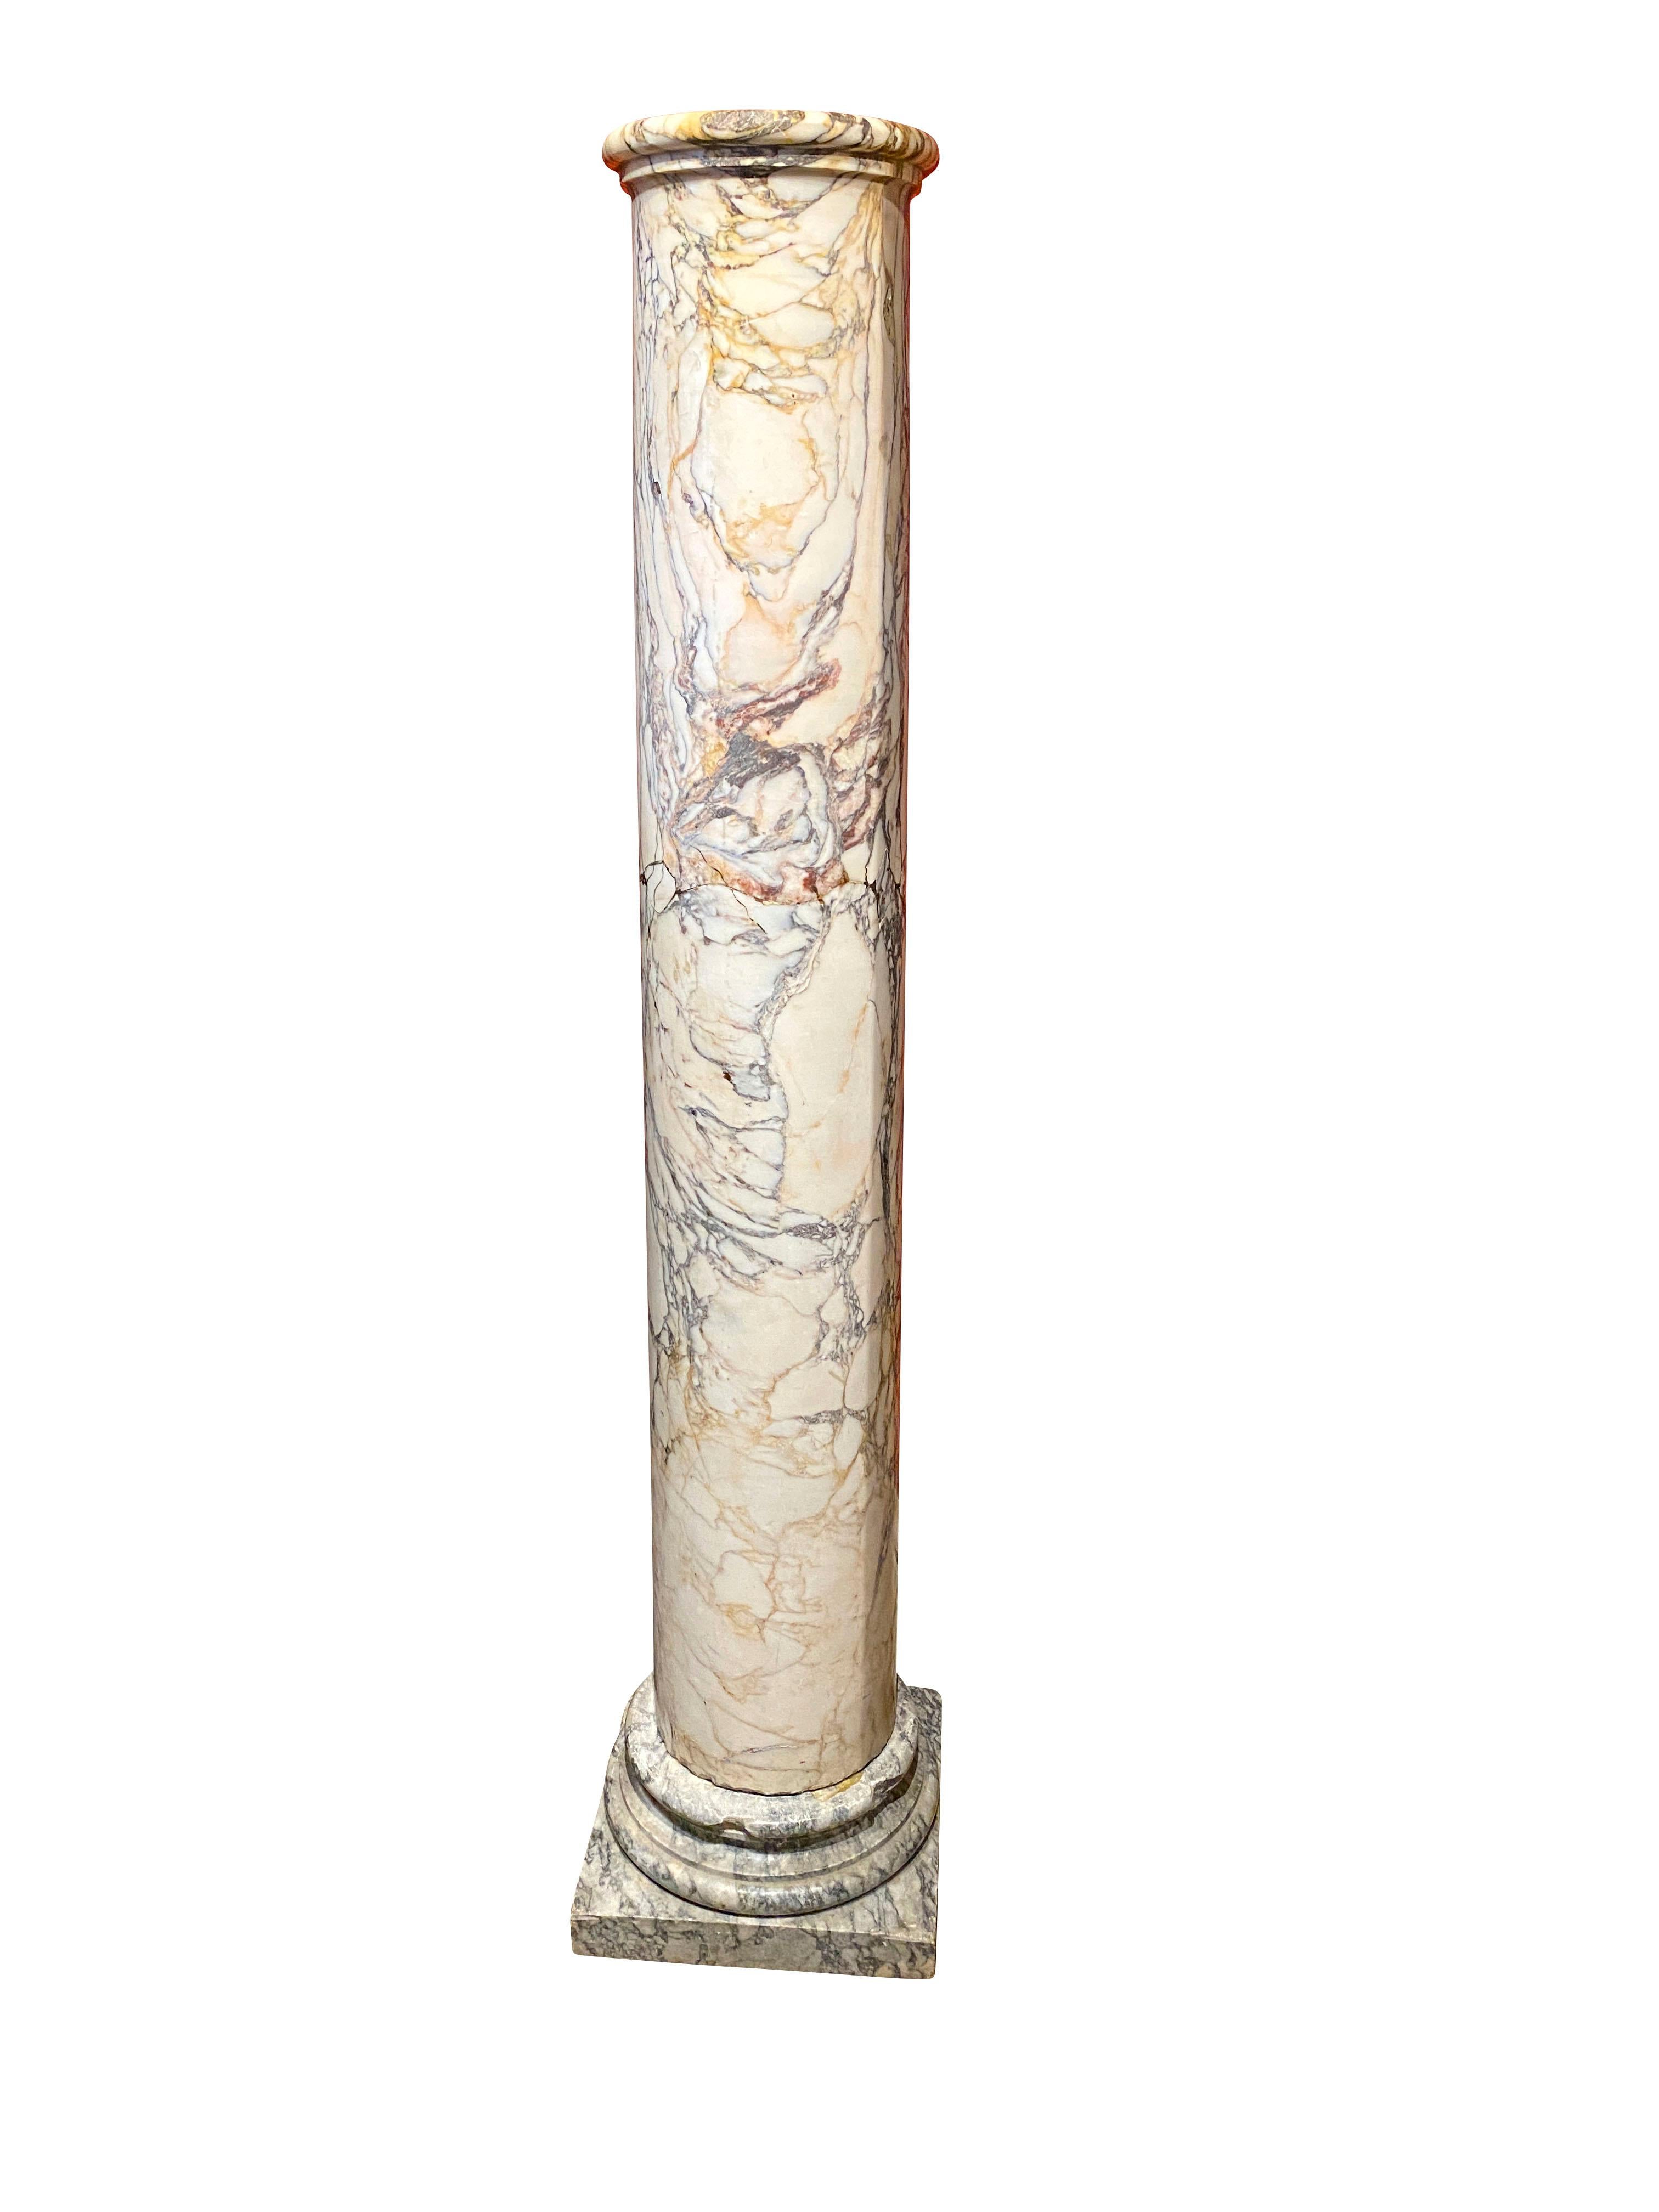 The tall column sitting on a socle with square base.